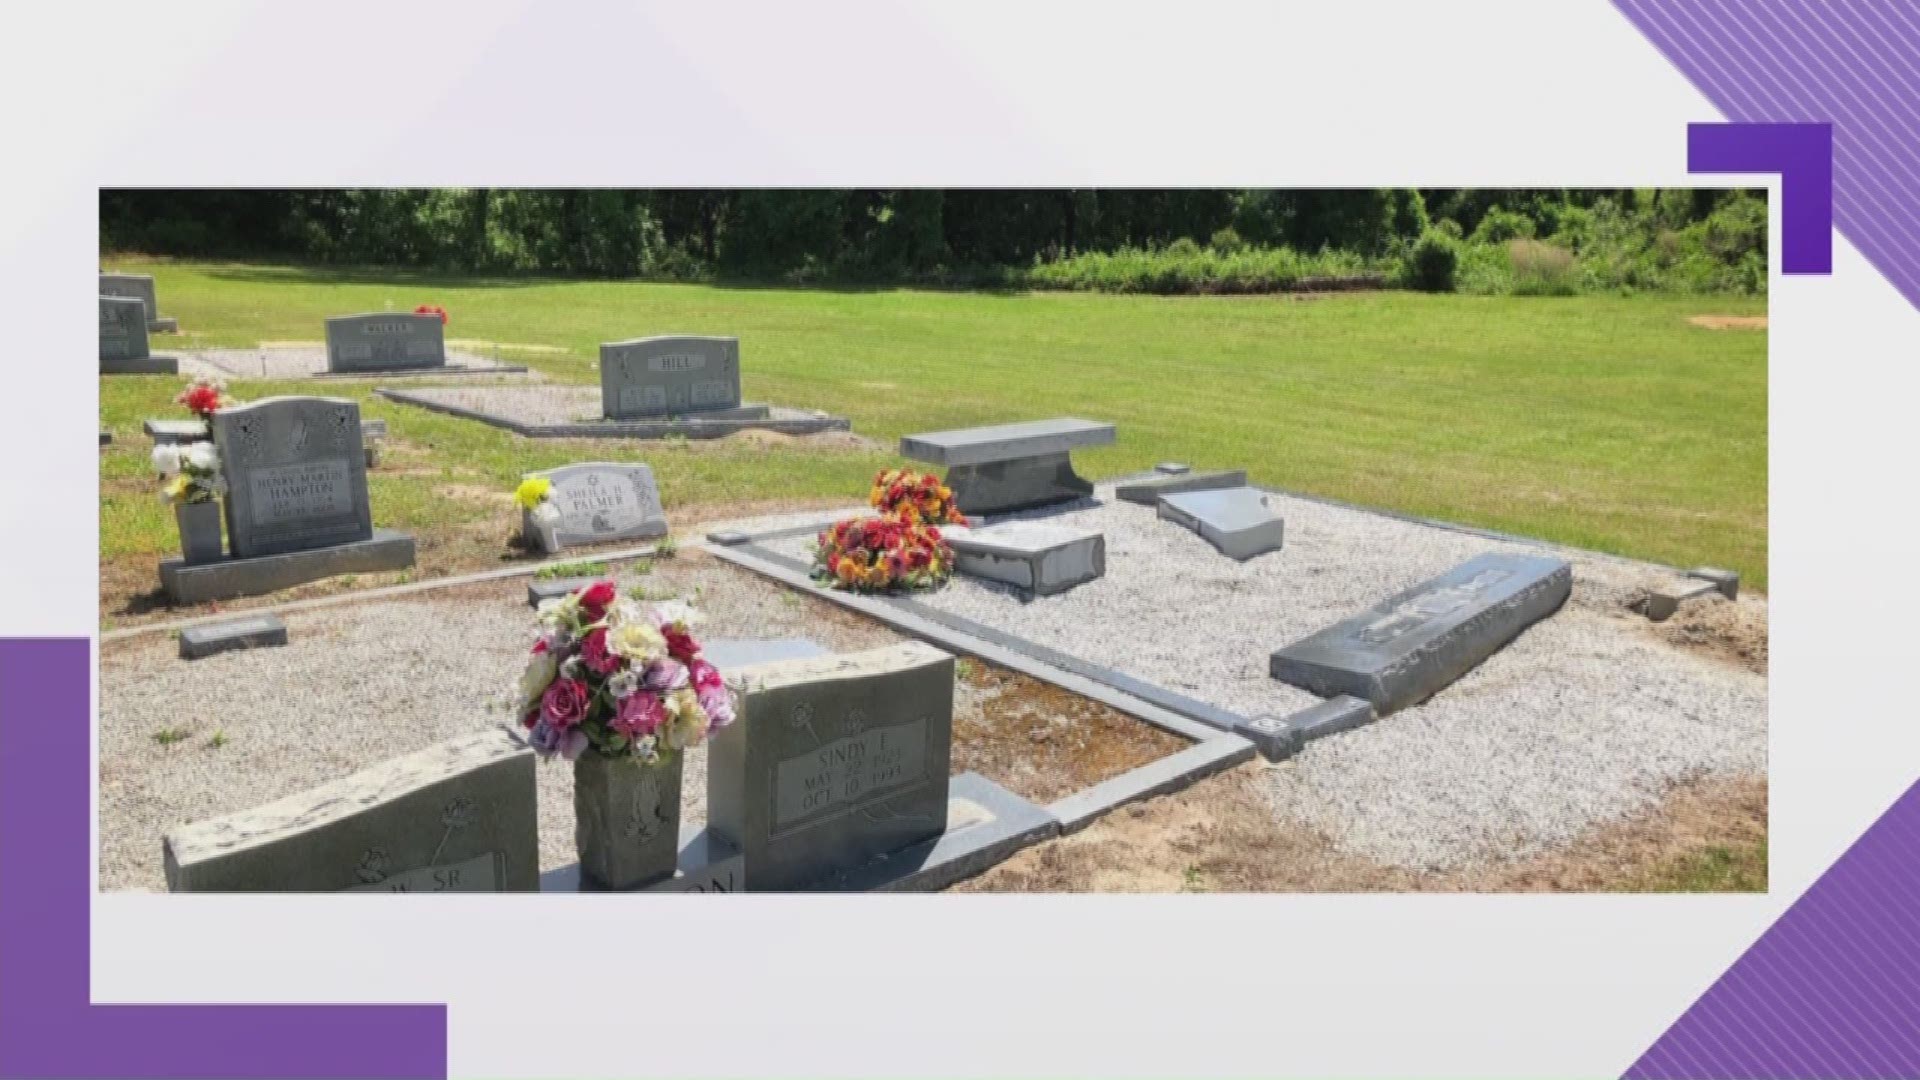 Headstones and grave sites were damaged at the AME New Bethel Church Cemetery in Lexington.